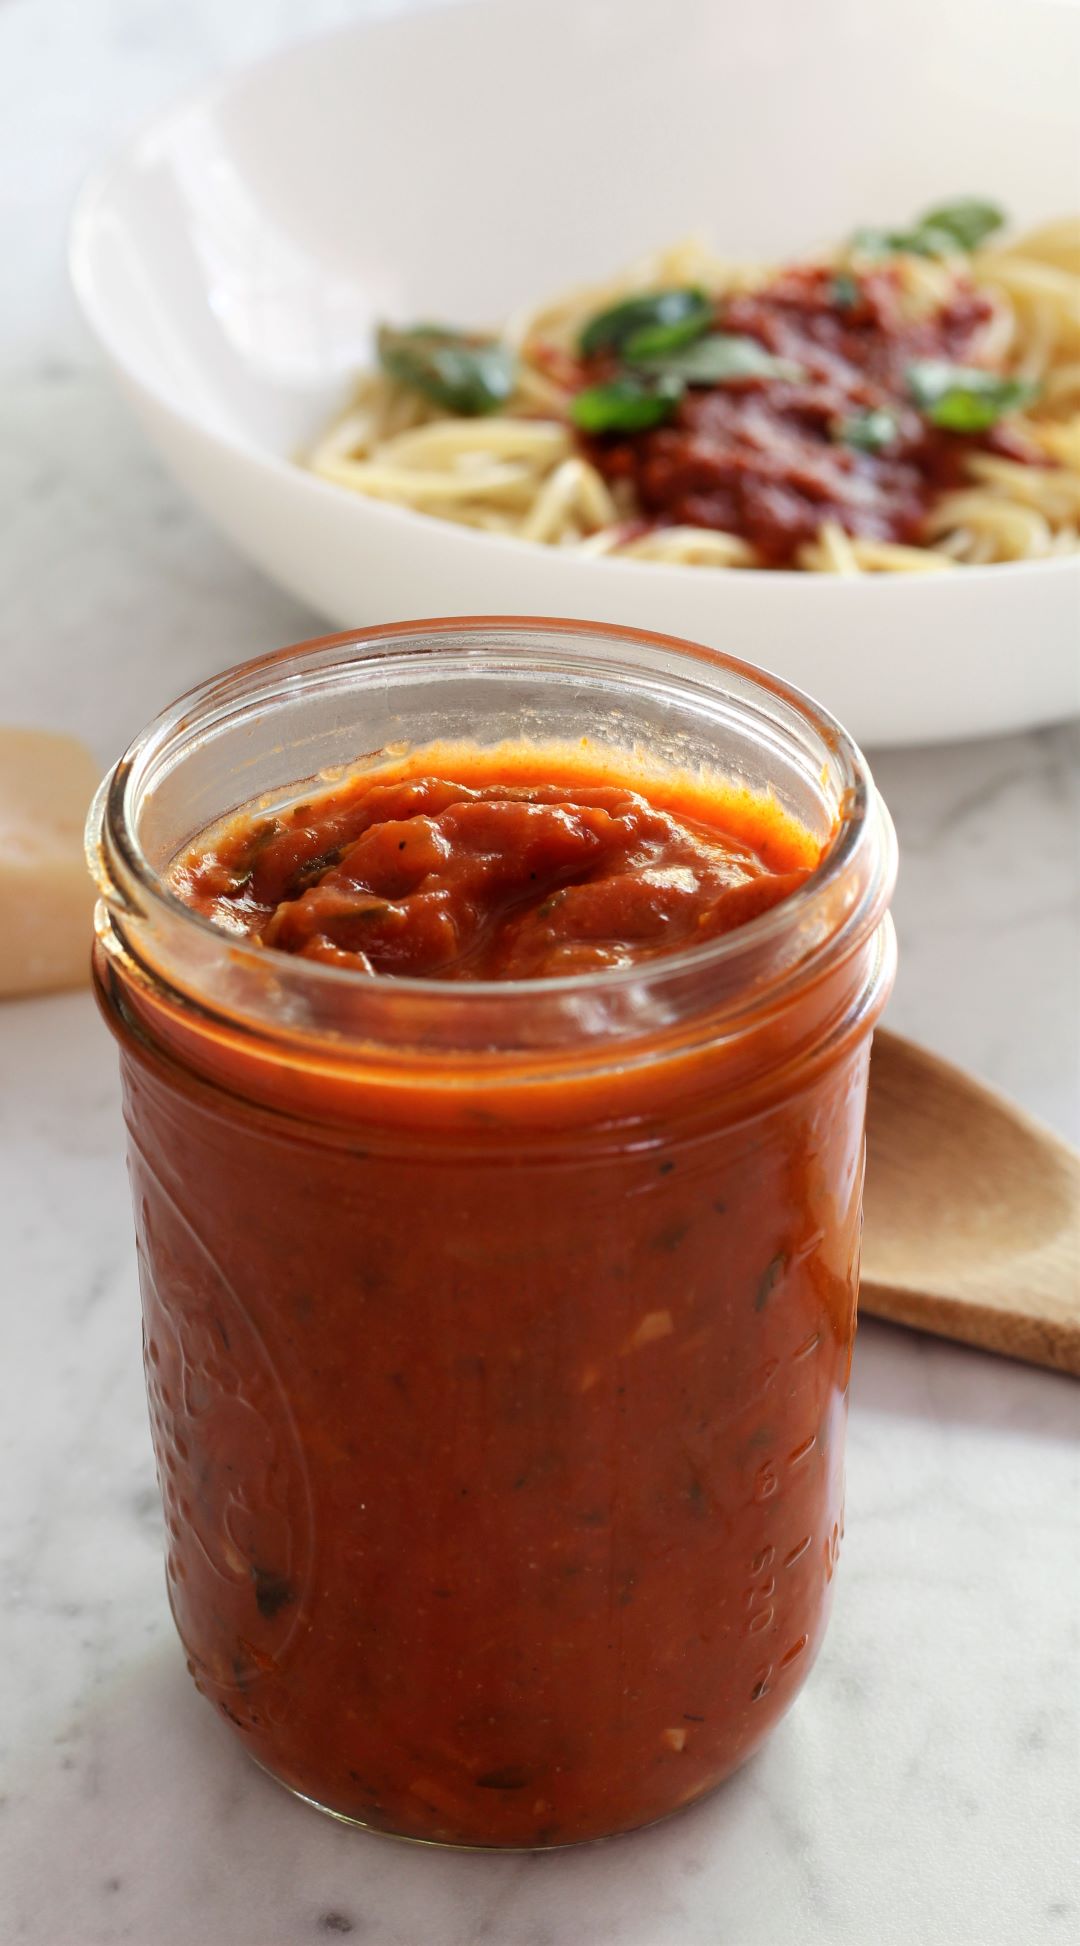 Made From Scratch Spaghetti Sauce - Pallet and Pantry